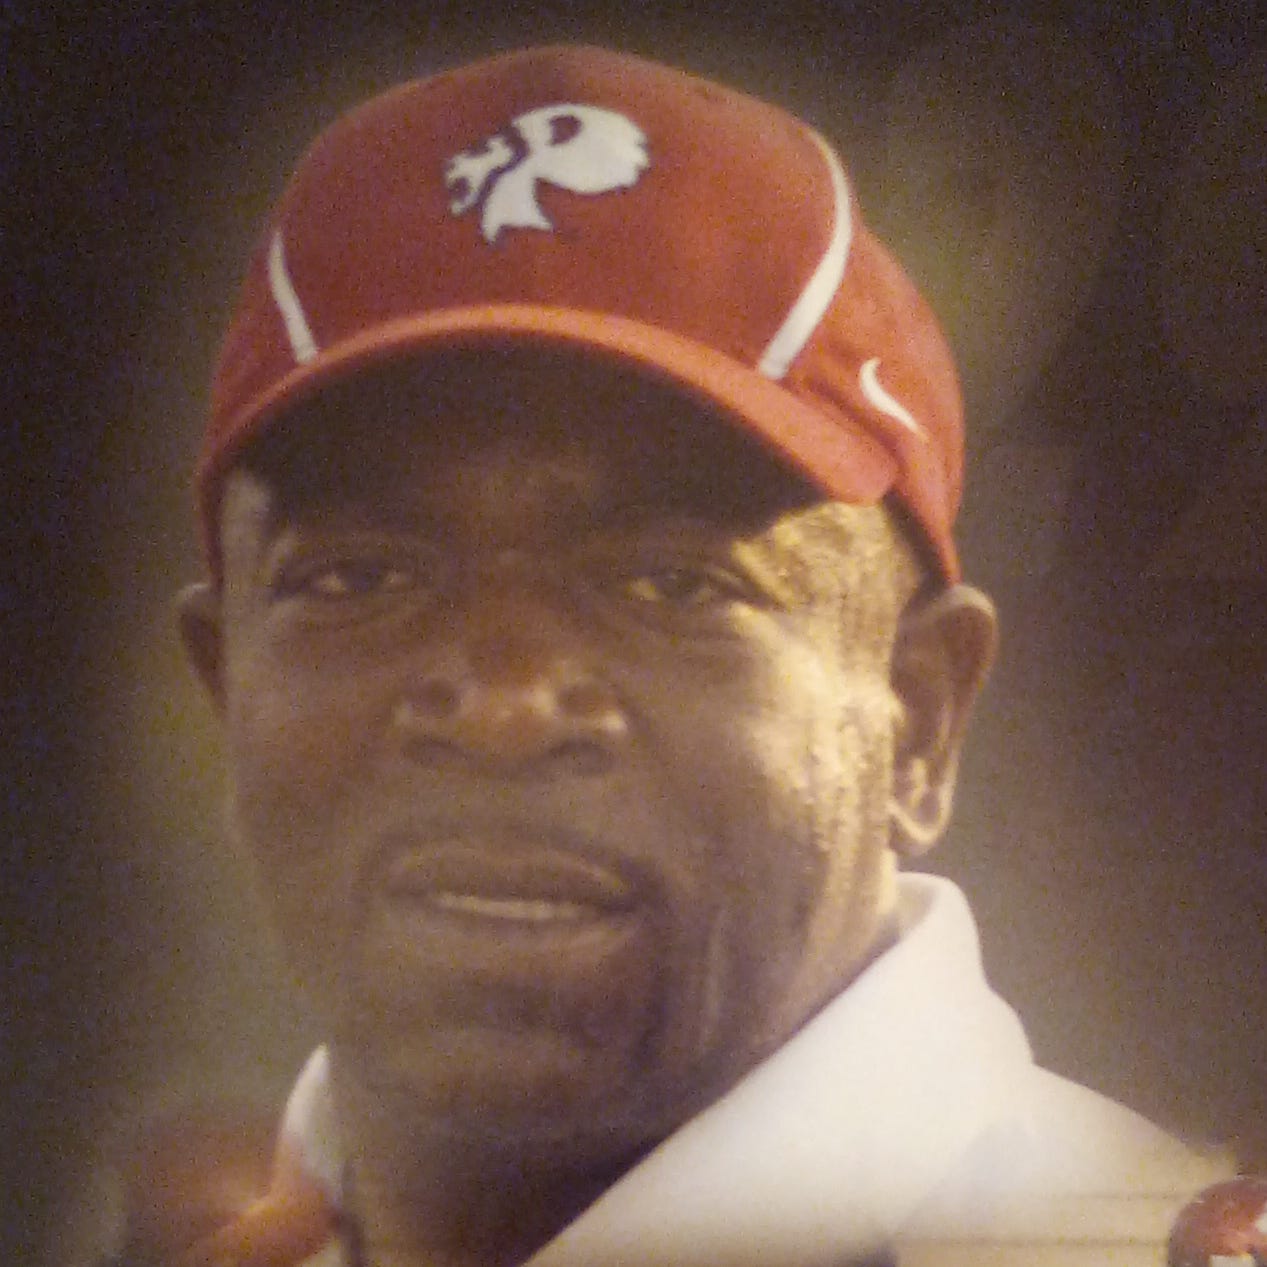 Father figure, mentor, friend: Prattville park renamed in honor of Coach Lo